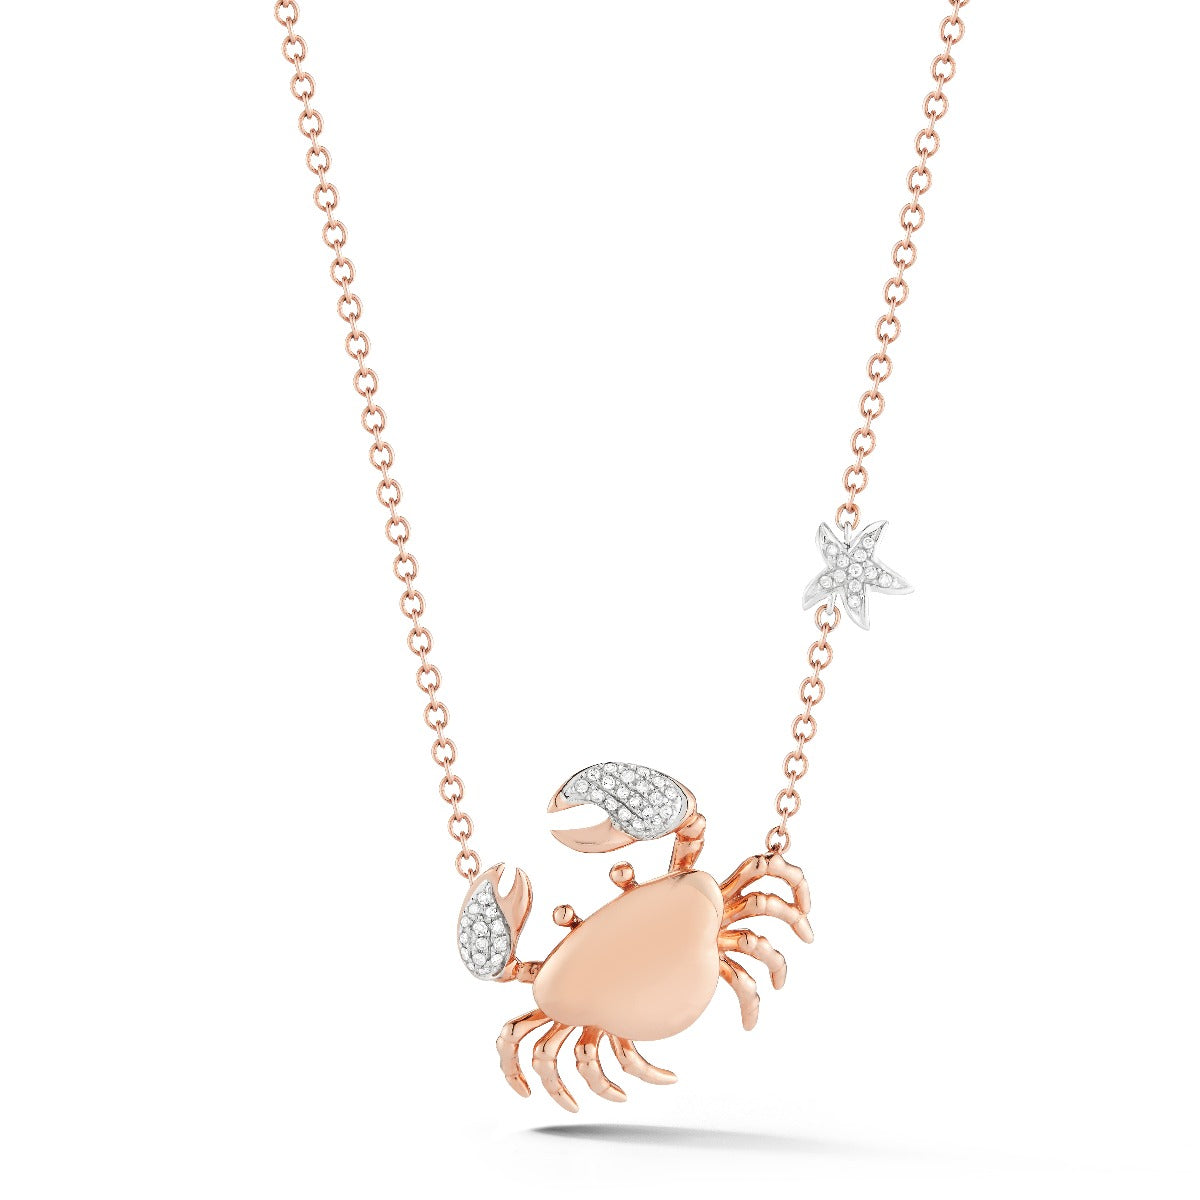 14K CRAB SET WITH 44 DIAMONDS T.W 0.15CT. 1/2 ON 18 INCHES CHAIN